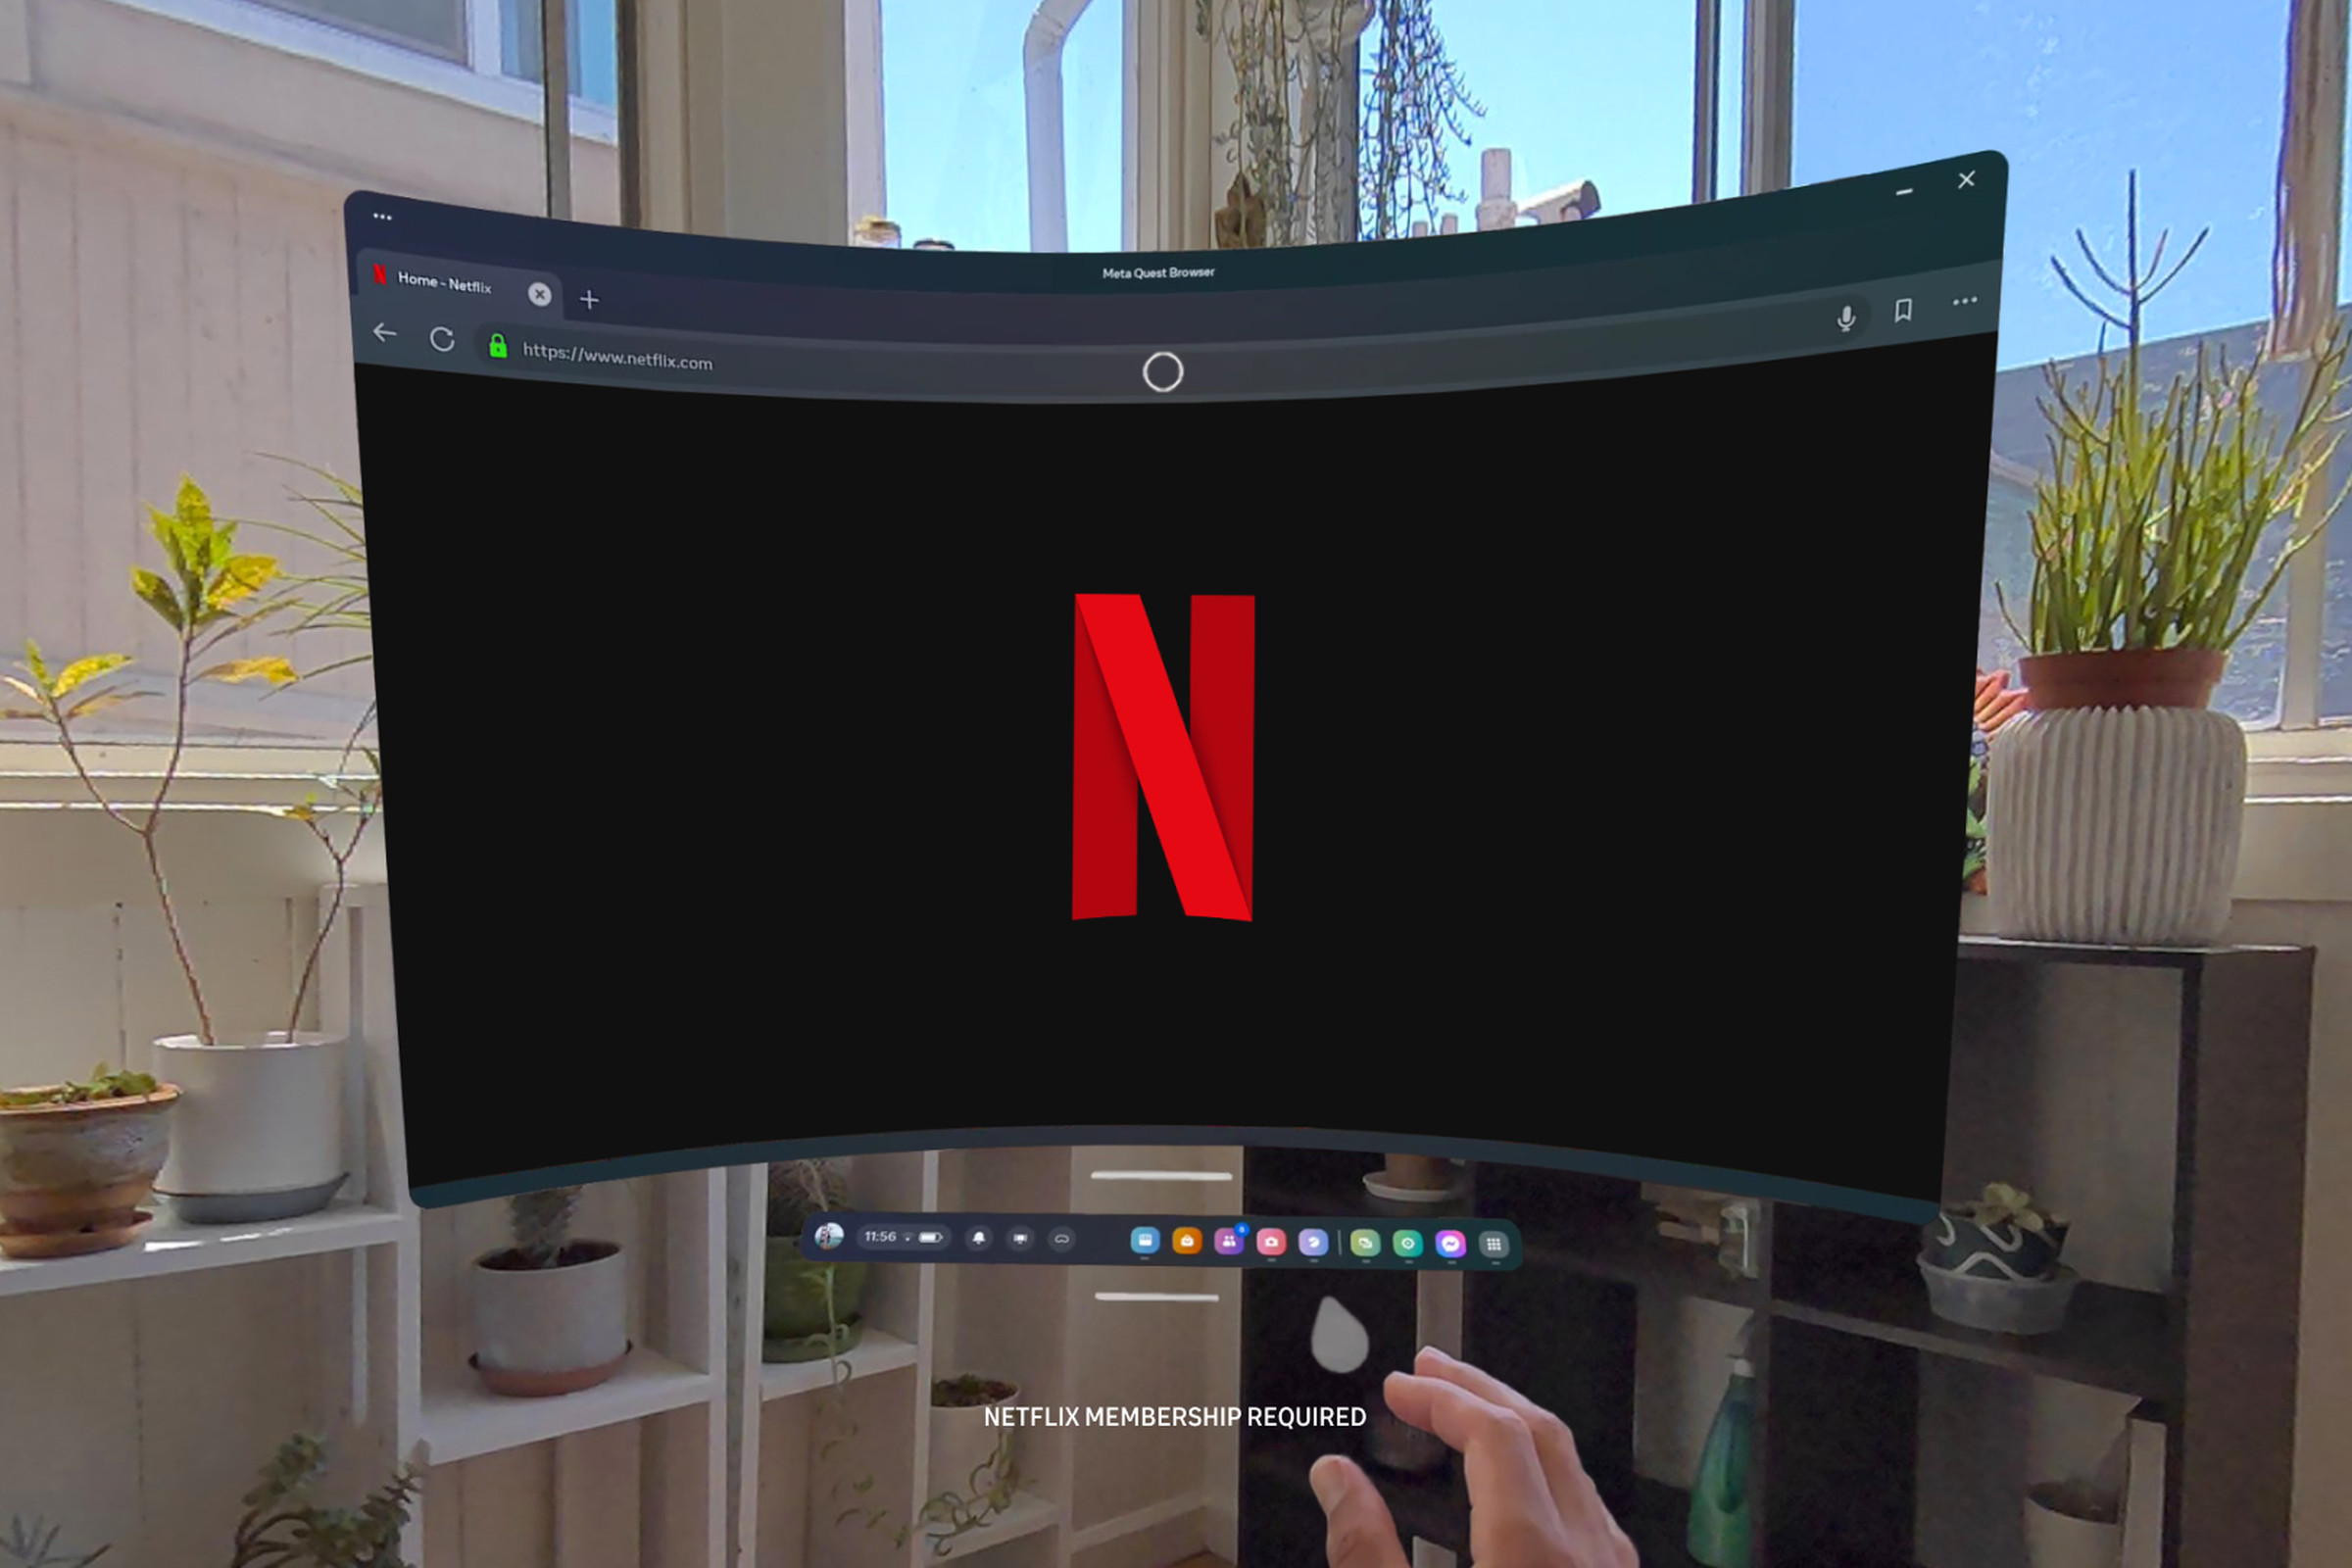 An image showing someone watching Netflix in virtual reality